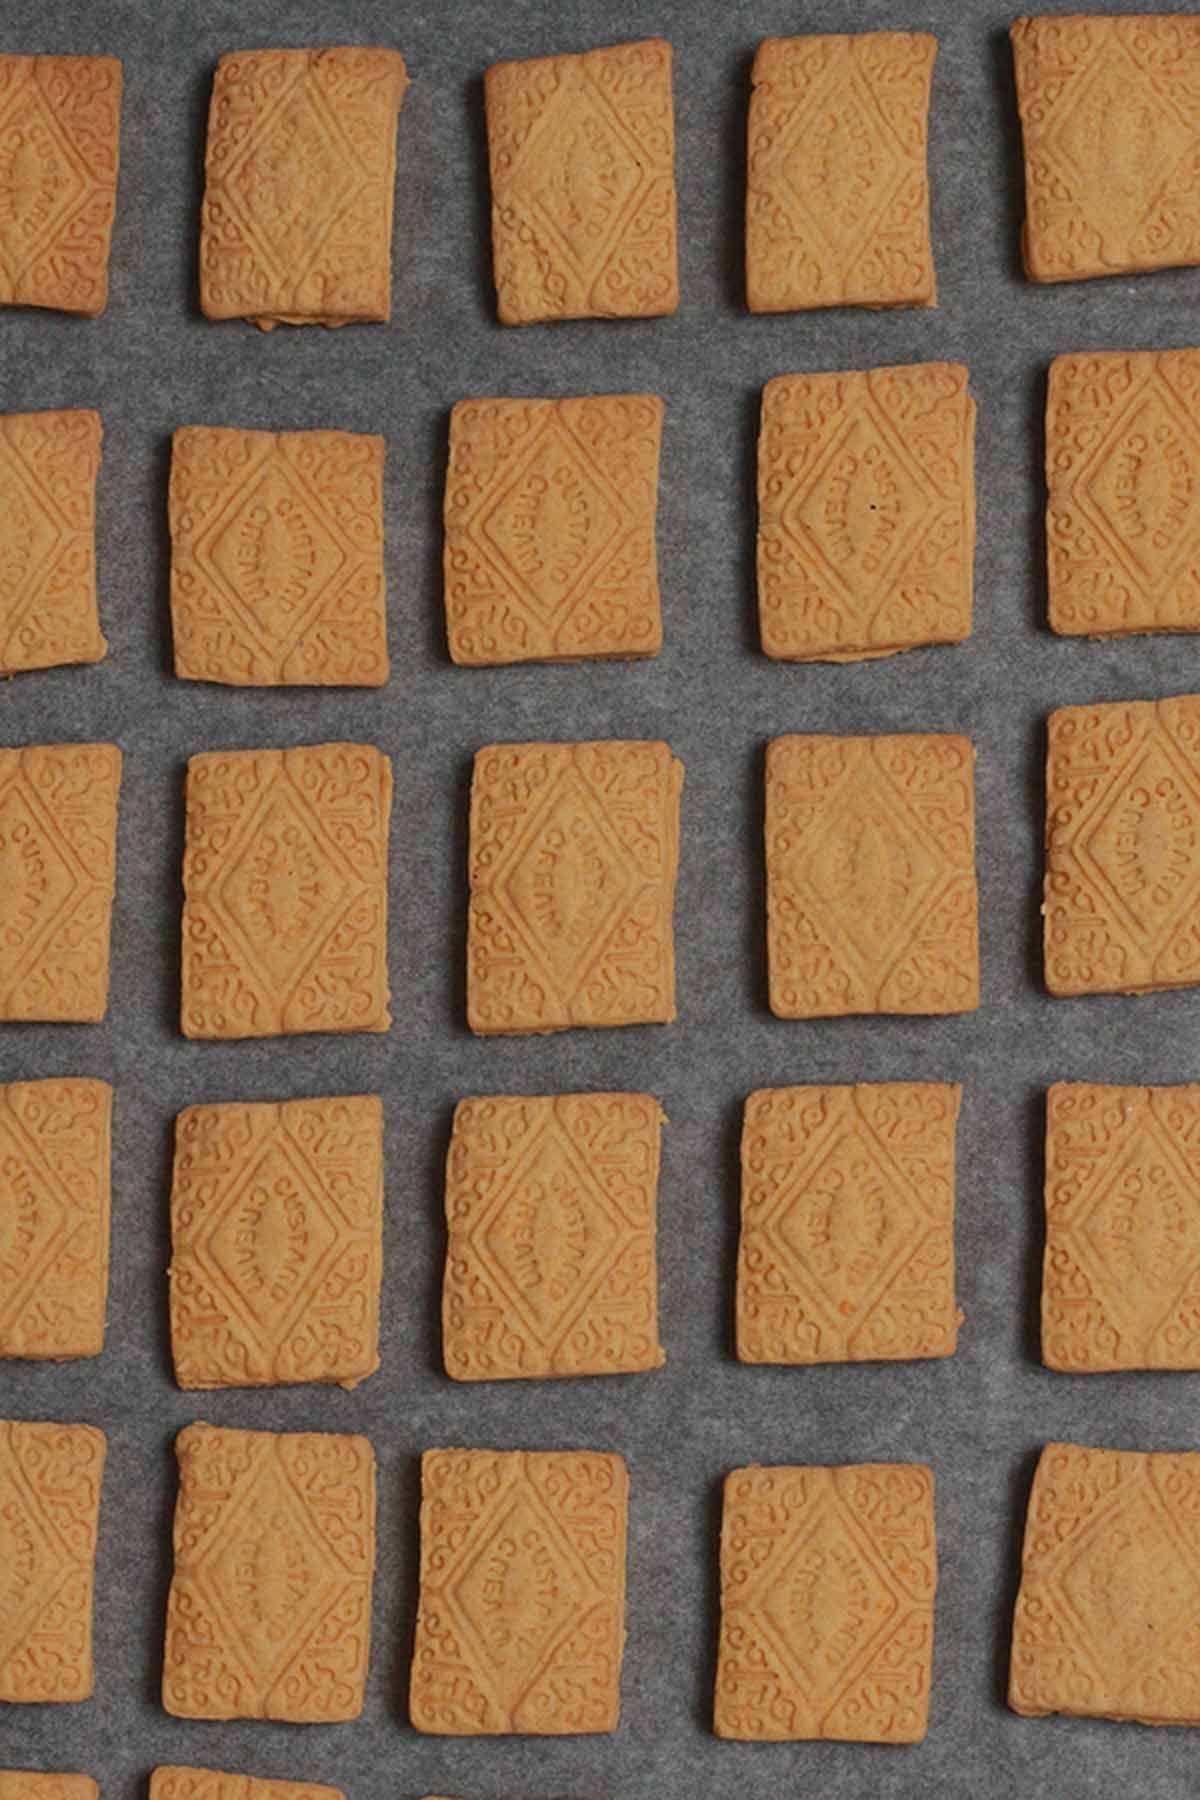 Biscuits On Tray After Baking